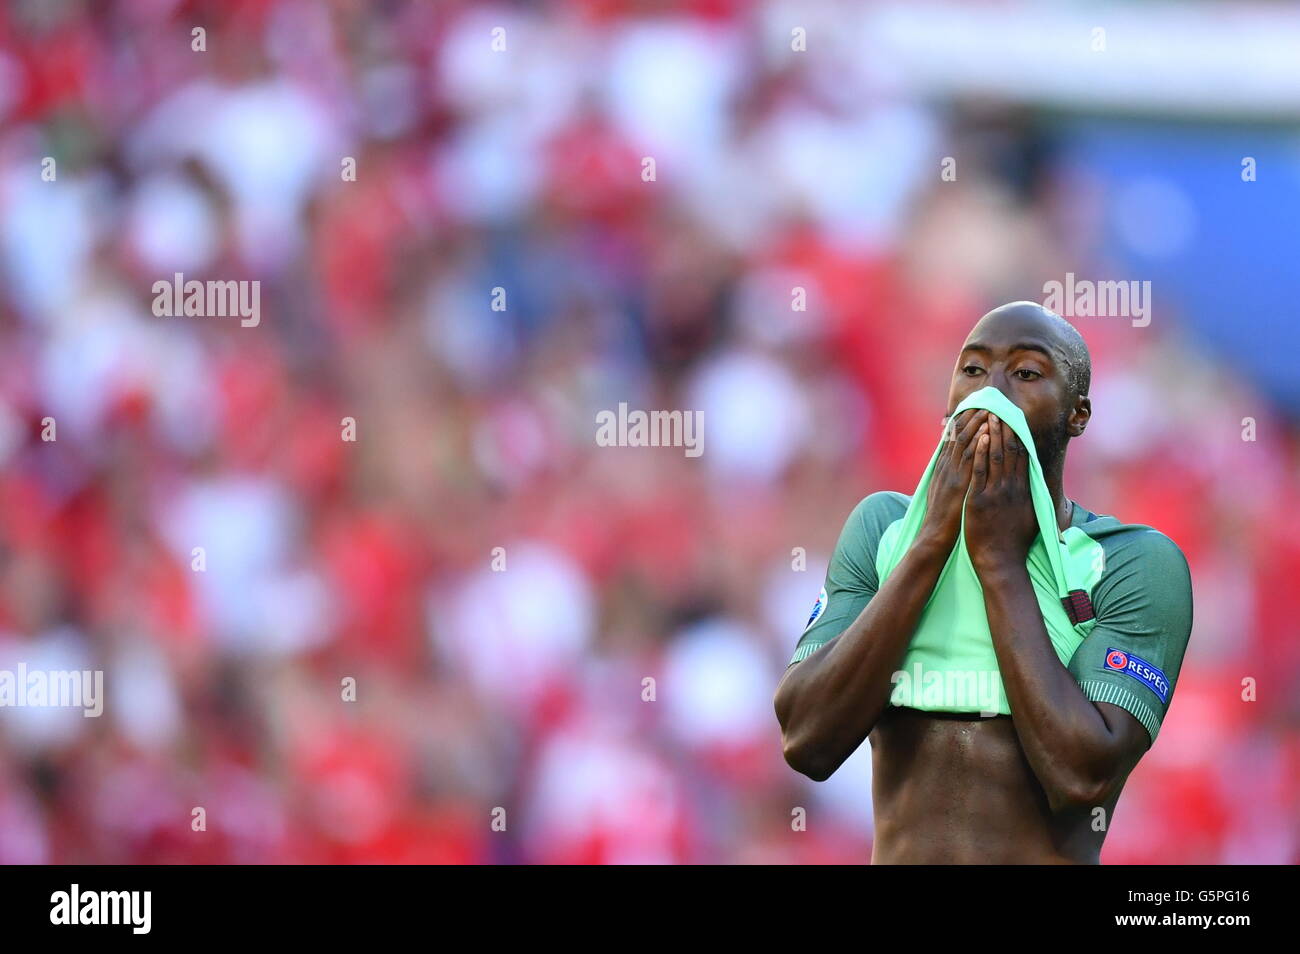 Lyon, France. 22nd June, 2016. Portugal's Danilo Pereira reacts during the UEFA Euro 2016 Group F soccer match between Hungary and Portugal at the Stade de Lyon in Lyon, France, 22 June 2016. Photo: Uwe Anspach/dpa/Alamy Live News Stock Photo